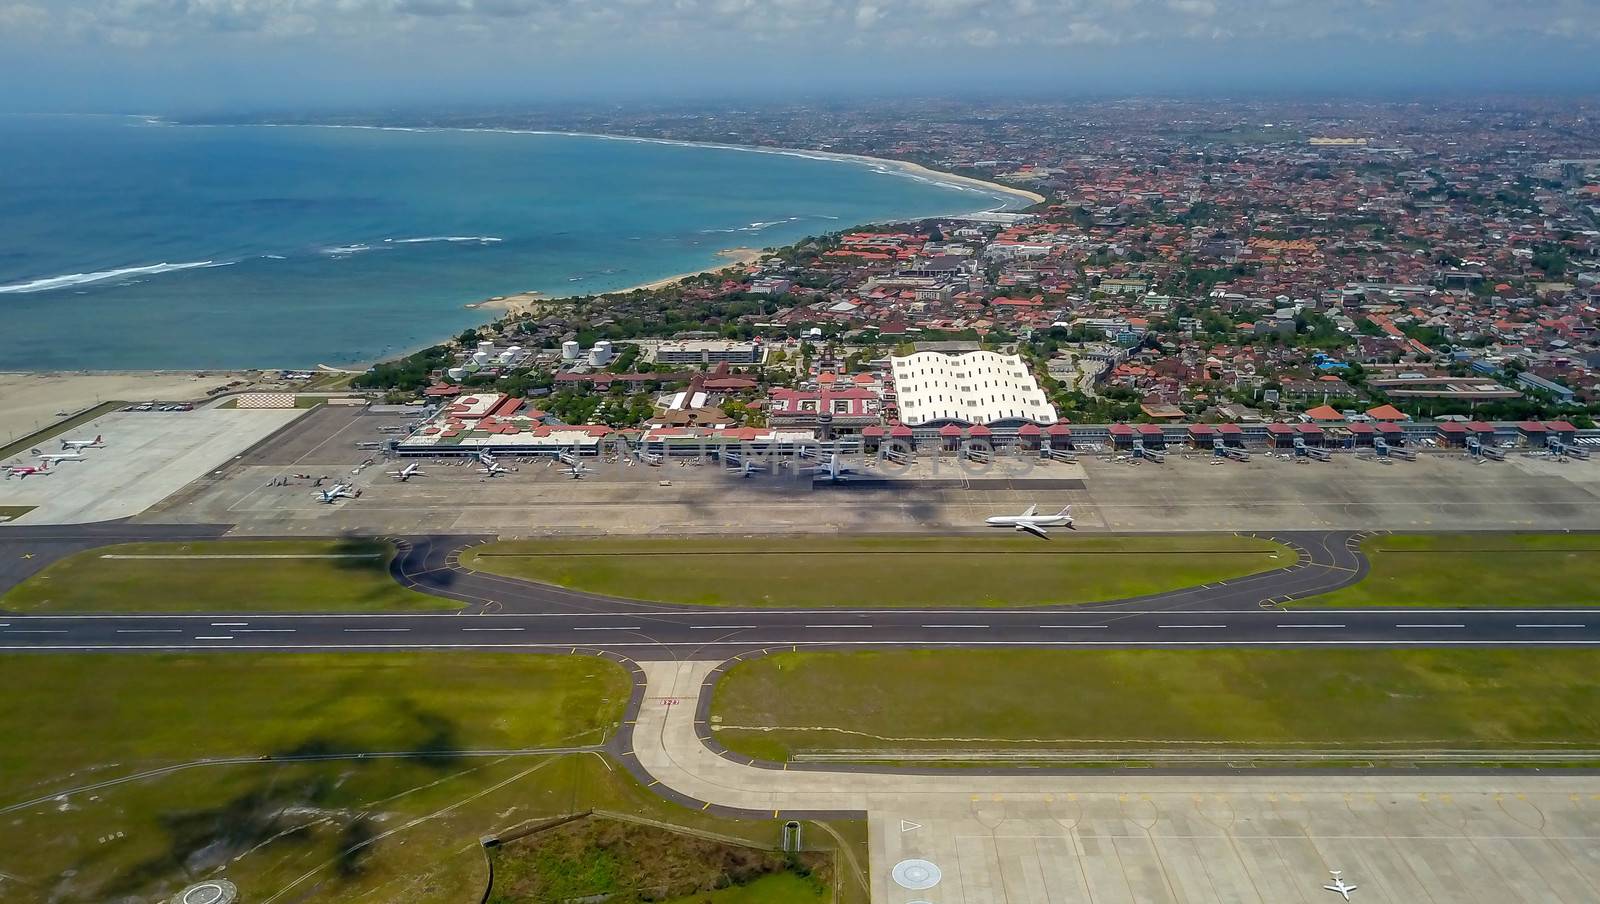 Commercial aircraft taxi on the runway at Denpasar Airport in Bali, Indonesia. Drone view of a big jet preparing to take off. Jet airplane turns to runway. Passenger jet prepares for departure.